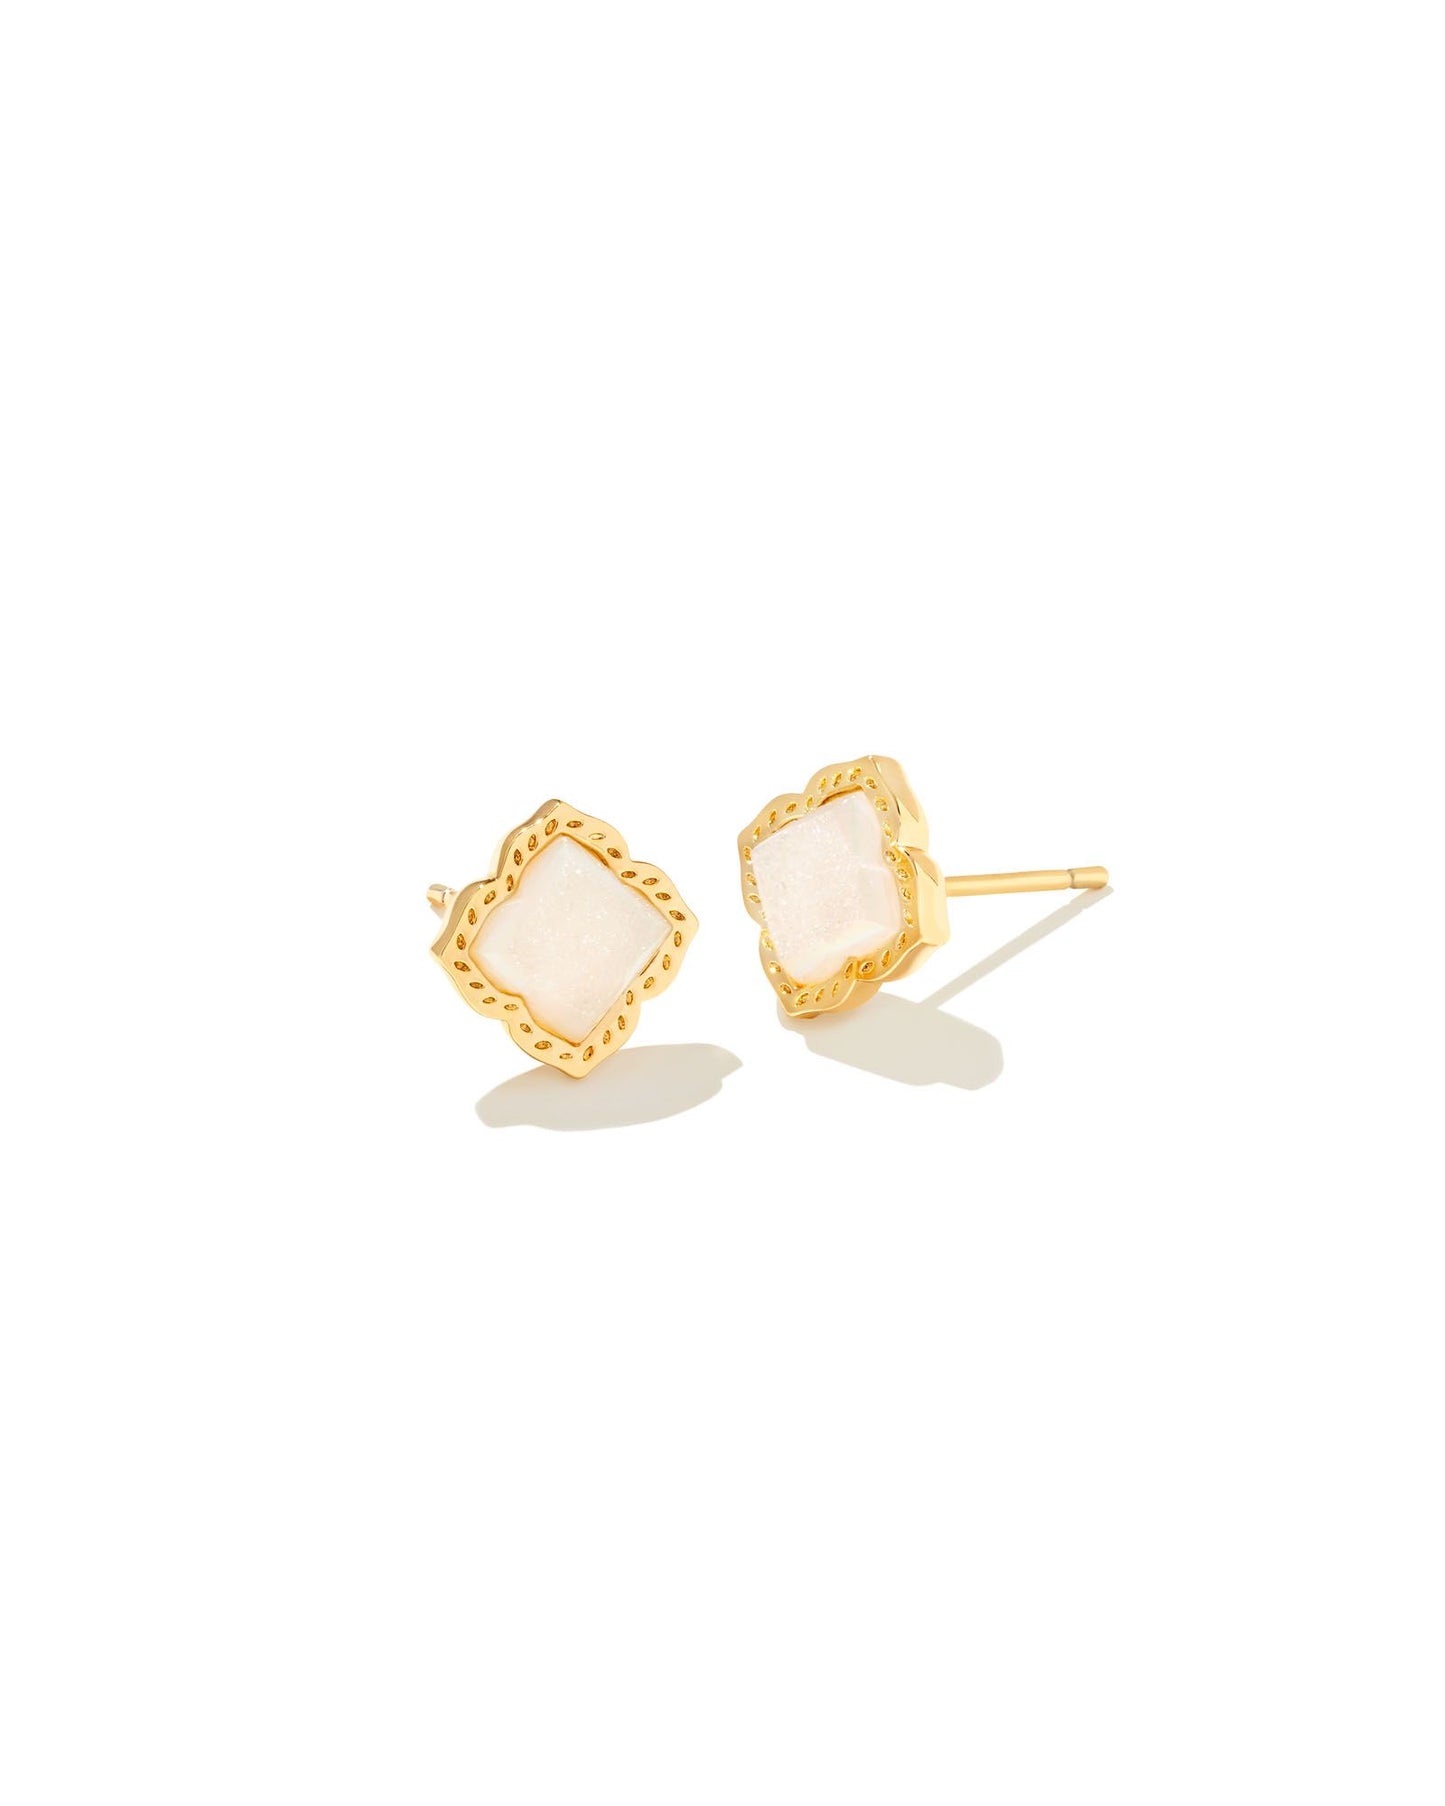 Mallory Stud Earrings | Gold & Iridescent Drusy